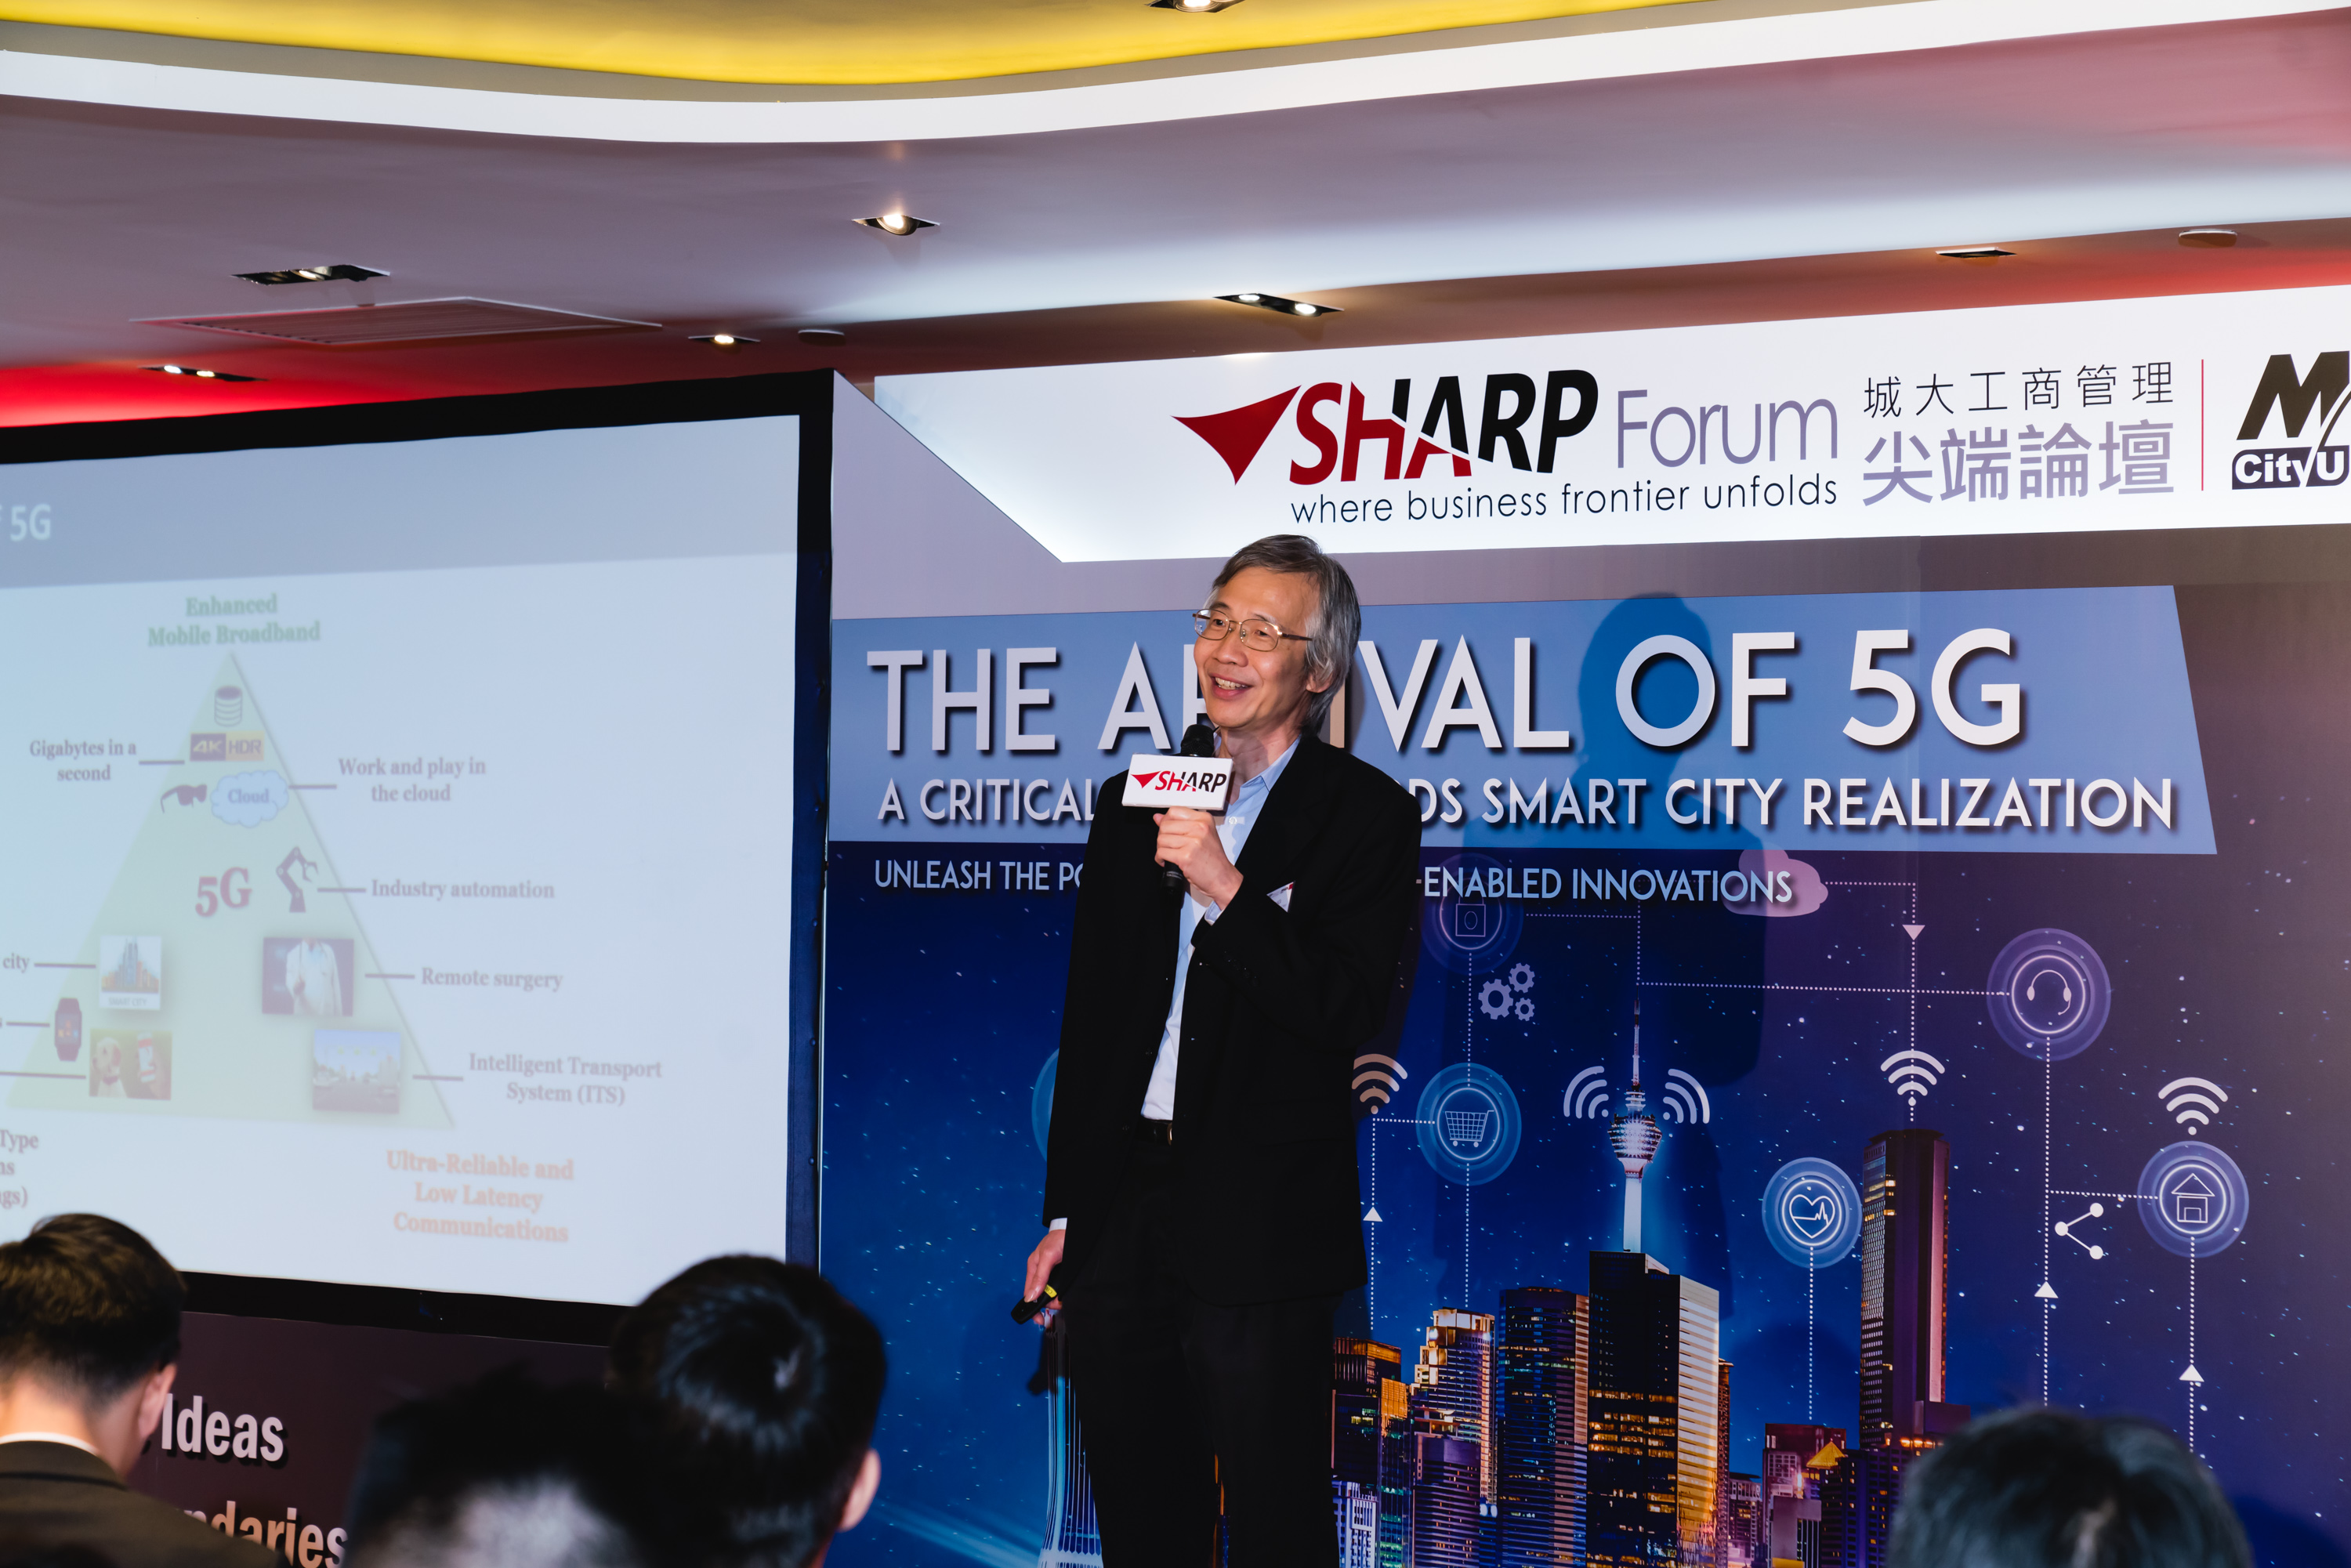 Mr. Rex Tong, Chief Systems Manager (Smart City) delivers Speech at the “MBA SHARP Forum”.